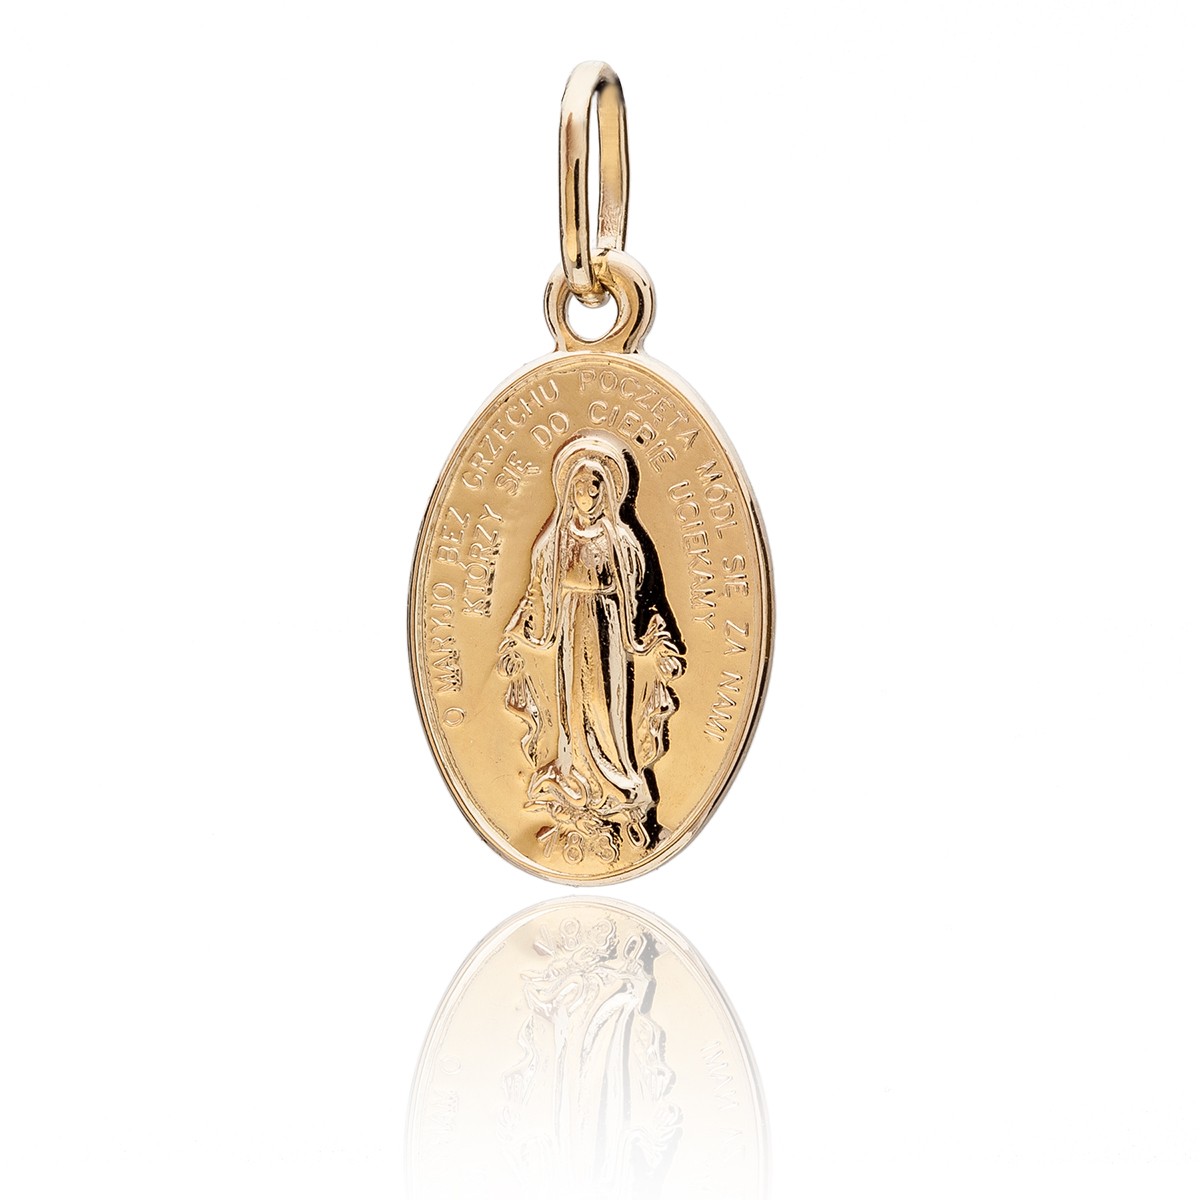 OUR LADY MIRACULOUS MEDAL SMALL GOLD 14K